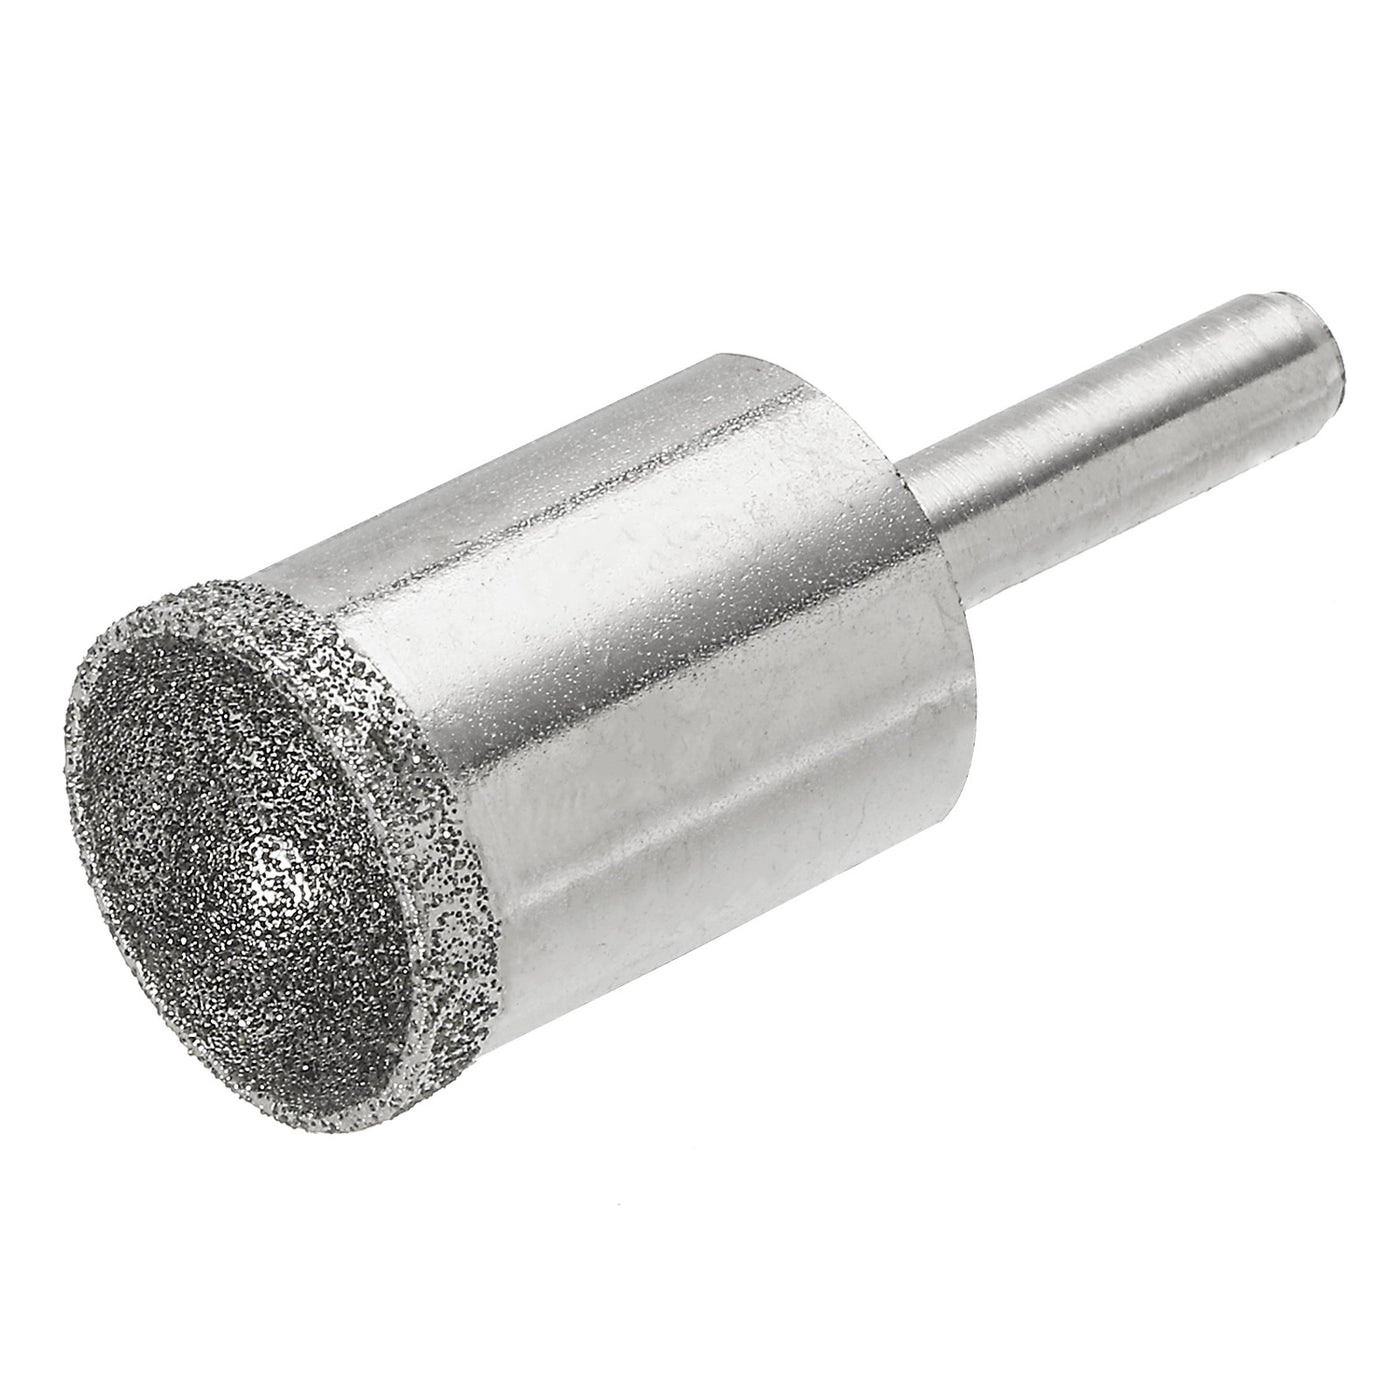 uxcell Uxcell 19mm 100 Grits Diamond Mounted Point Spherical Concave Head Bead Grinding Bit